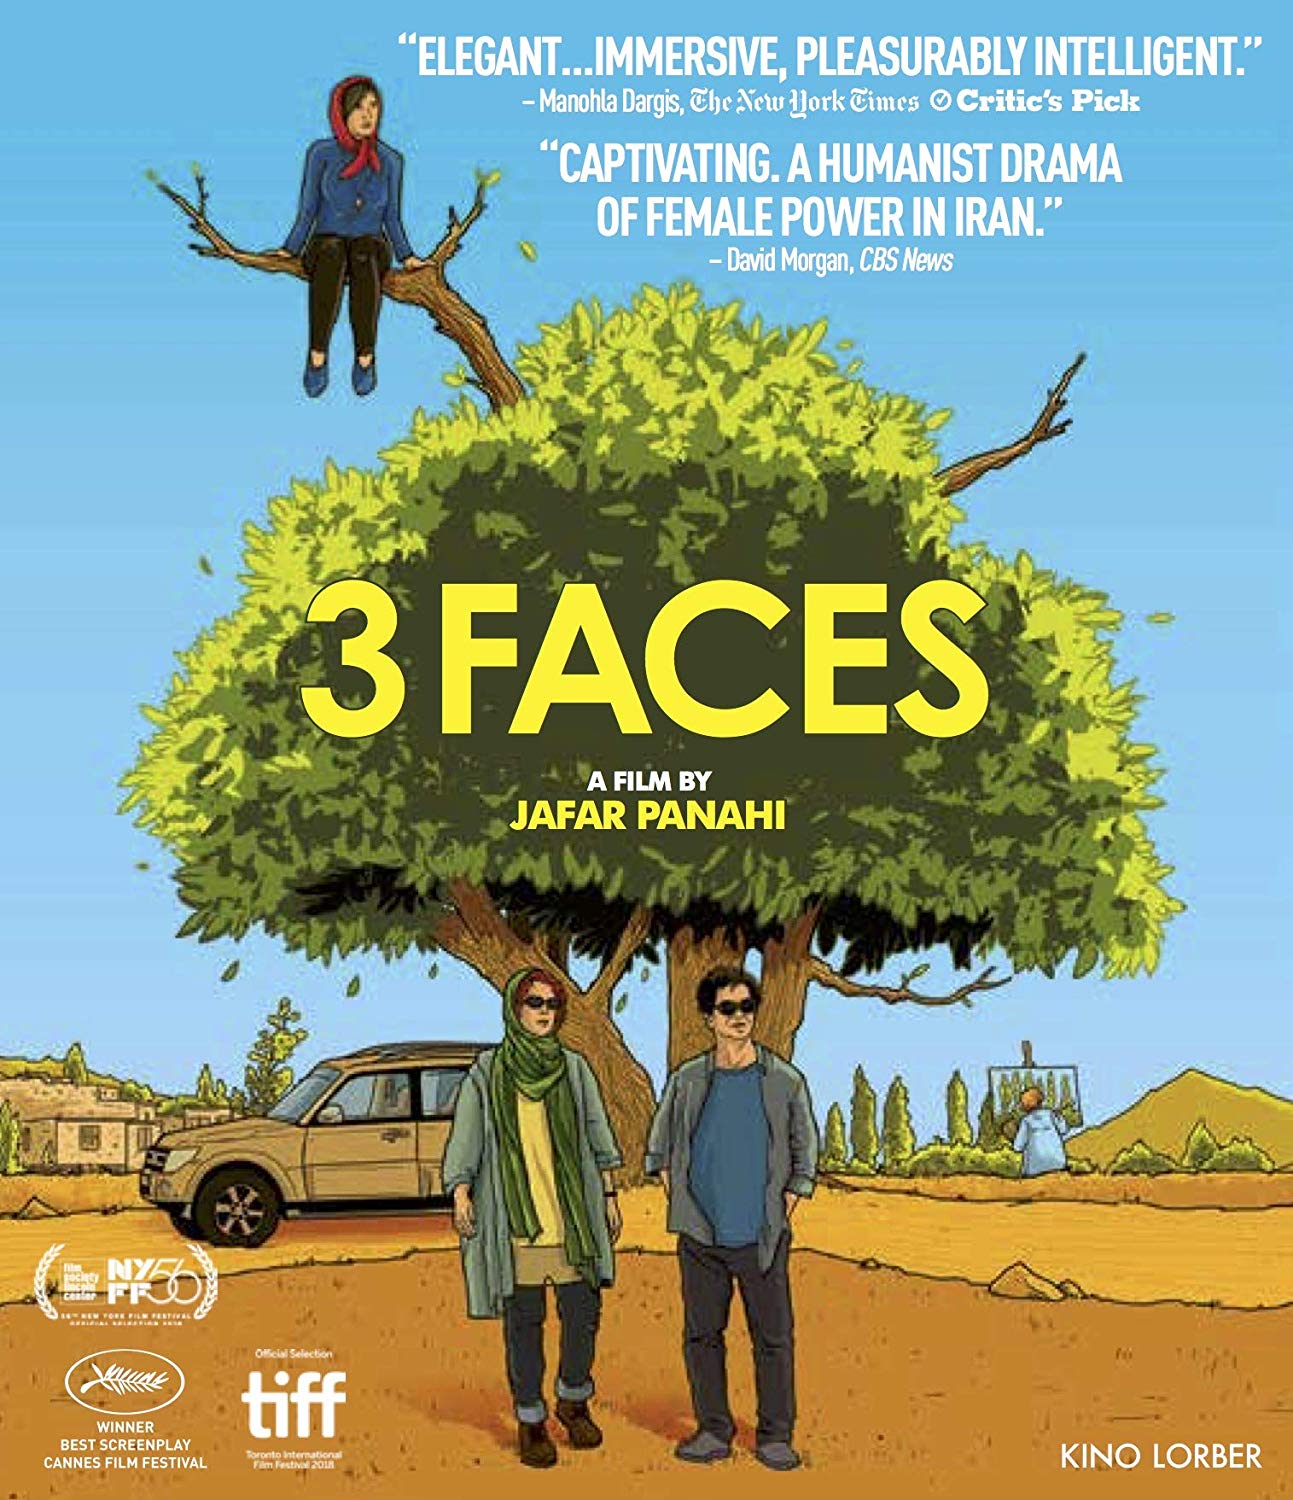 3 Faces [Blu-ray] cover art